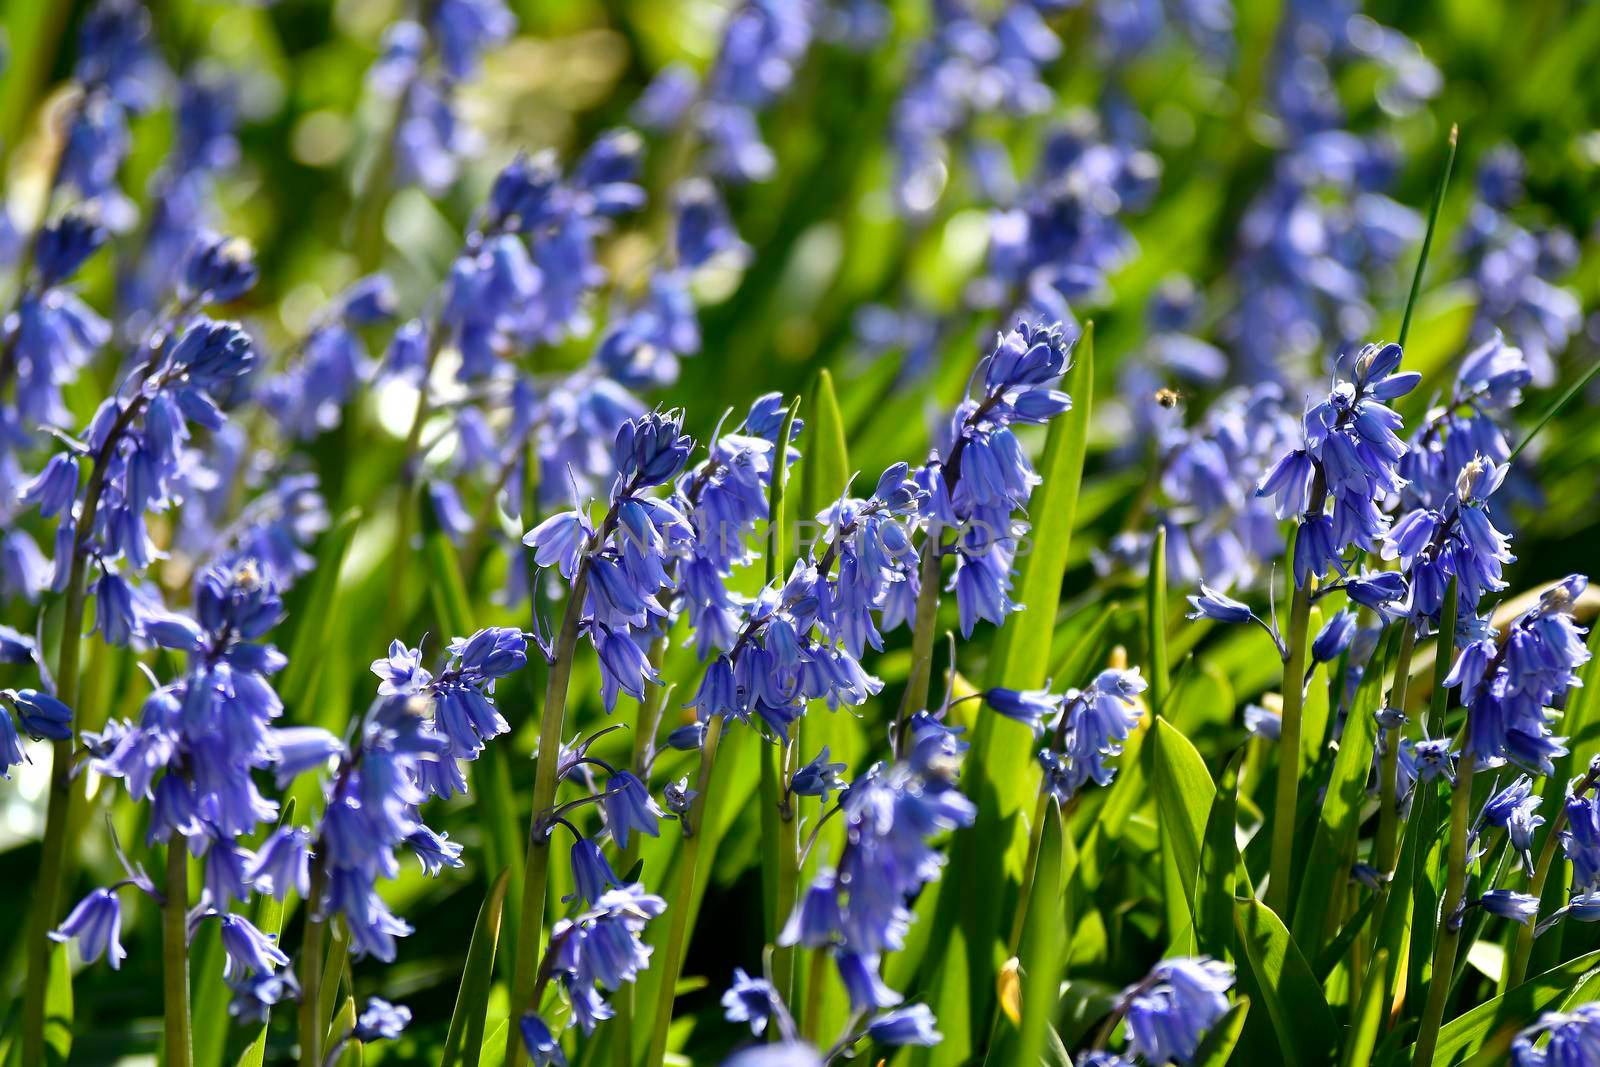 Bluebells with flowers in a German garden in spring